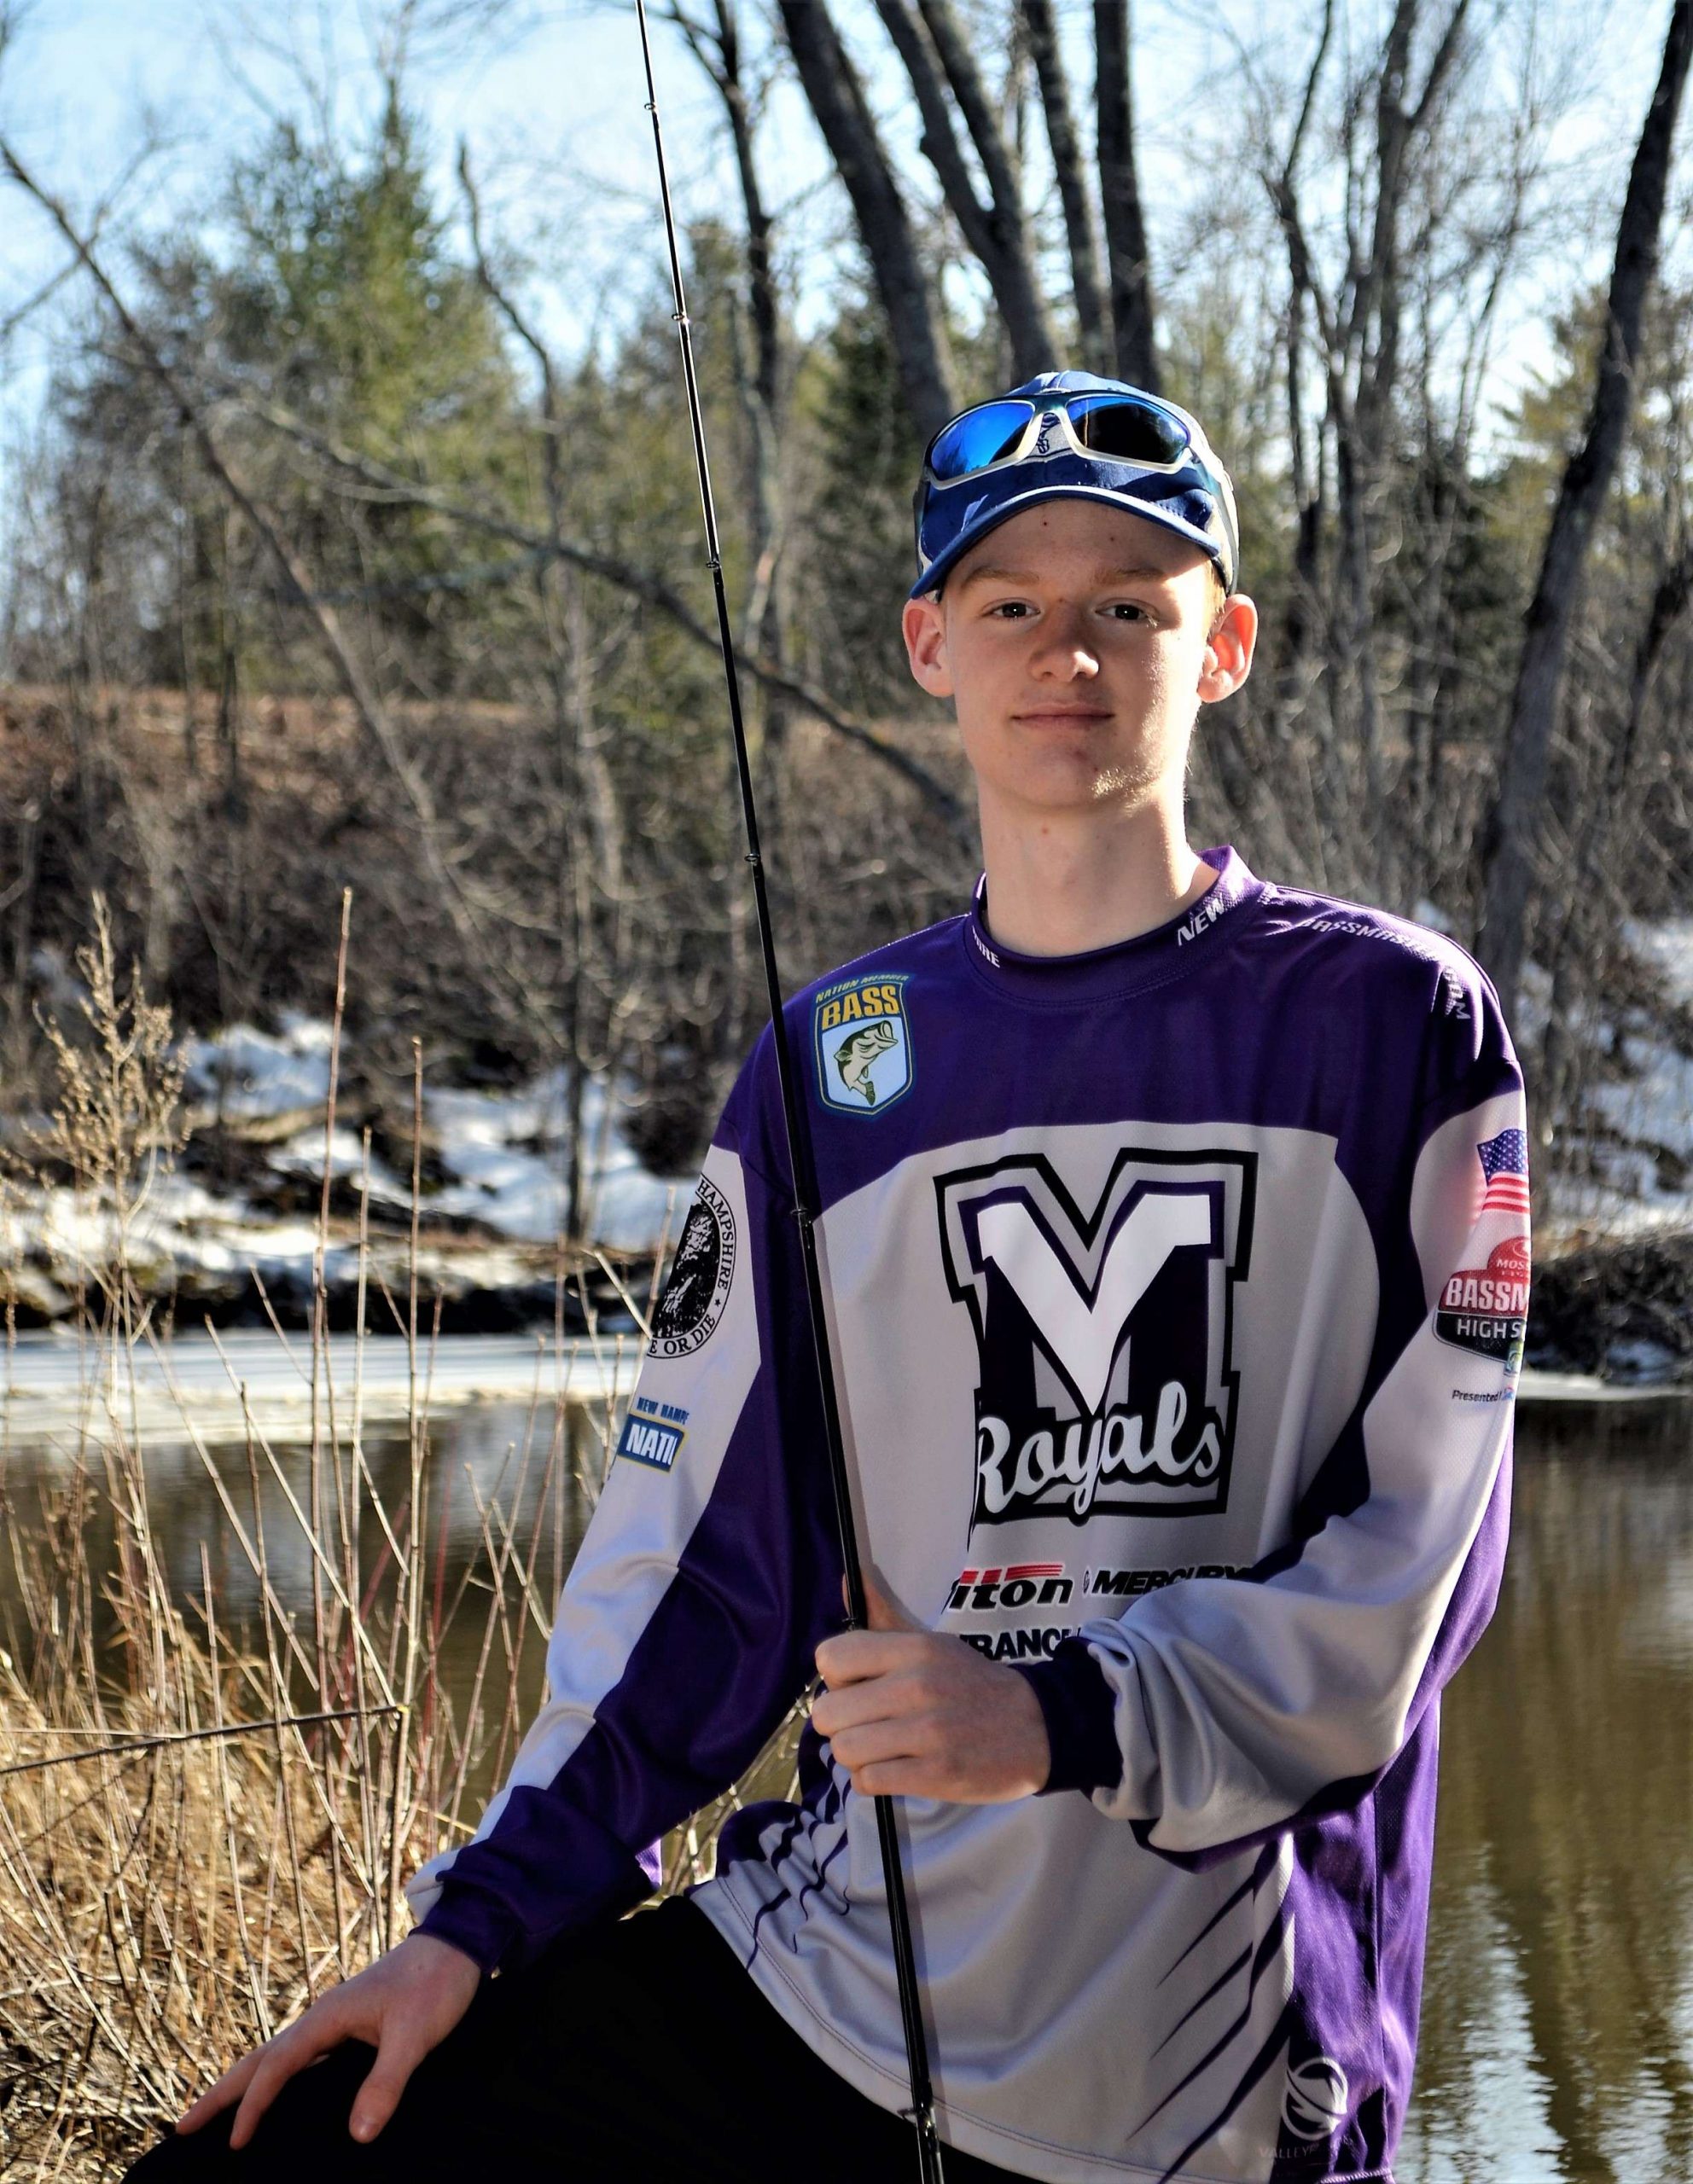 <p><strong>Cole Moulton, Enfield, N.H.</strong></p><p>Cole Moulton, a junior at Mascoma Valley Regional High School, netted three wins in the 2020 tournament season as well as one Top 20 finish. He is a three-time qualifier for the Bassmaster High School National Championship (2019-2021) and a two-time qualifier for the Bassmaster Junior National Championship (2017-2018). Moulton started a community fishing club in order to compete in high school fishing tournaments. In 2020 this club became the official bass fishing team of Mascoma High School, where he serves as team captain. âHe personally petitioned for our school to attain âclubâ status in New Hampshire for a Bass Fishing Team. With Cole as a catalyst, Mascoma High School has begun the process of making fishing a varsity-level sport,â says Keli S. Green, Mascoma Varsity soccer coach, driver educator and mathematics teacher. Moulton also serves as president of the New Hampshire Junior Bassmasters and plays defensive position on the Mascoma Varsity Soccer Team, where he was selected by his teammates to serve as co-captain during his senior year.</p>